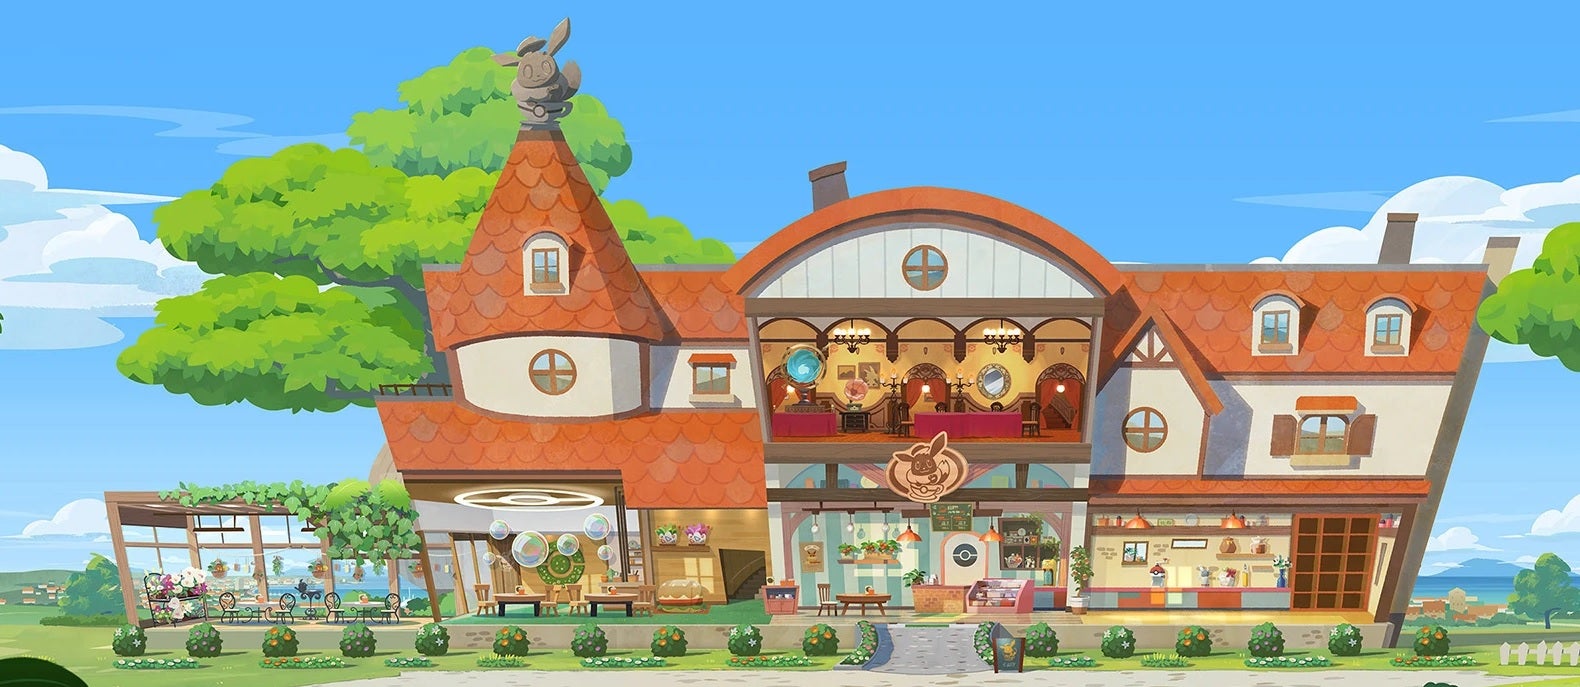 Image for Pokemon Cafe Mix Microtransactions: How to recruit Pikachu and get more Acorns